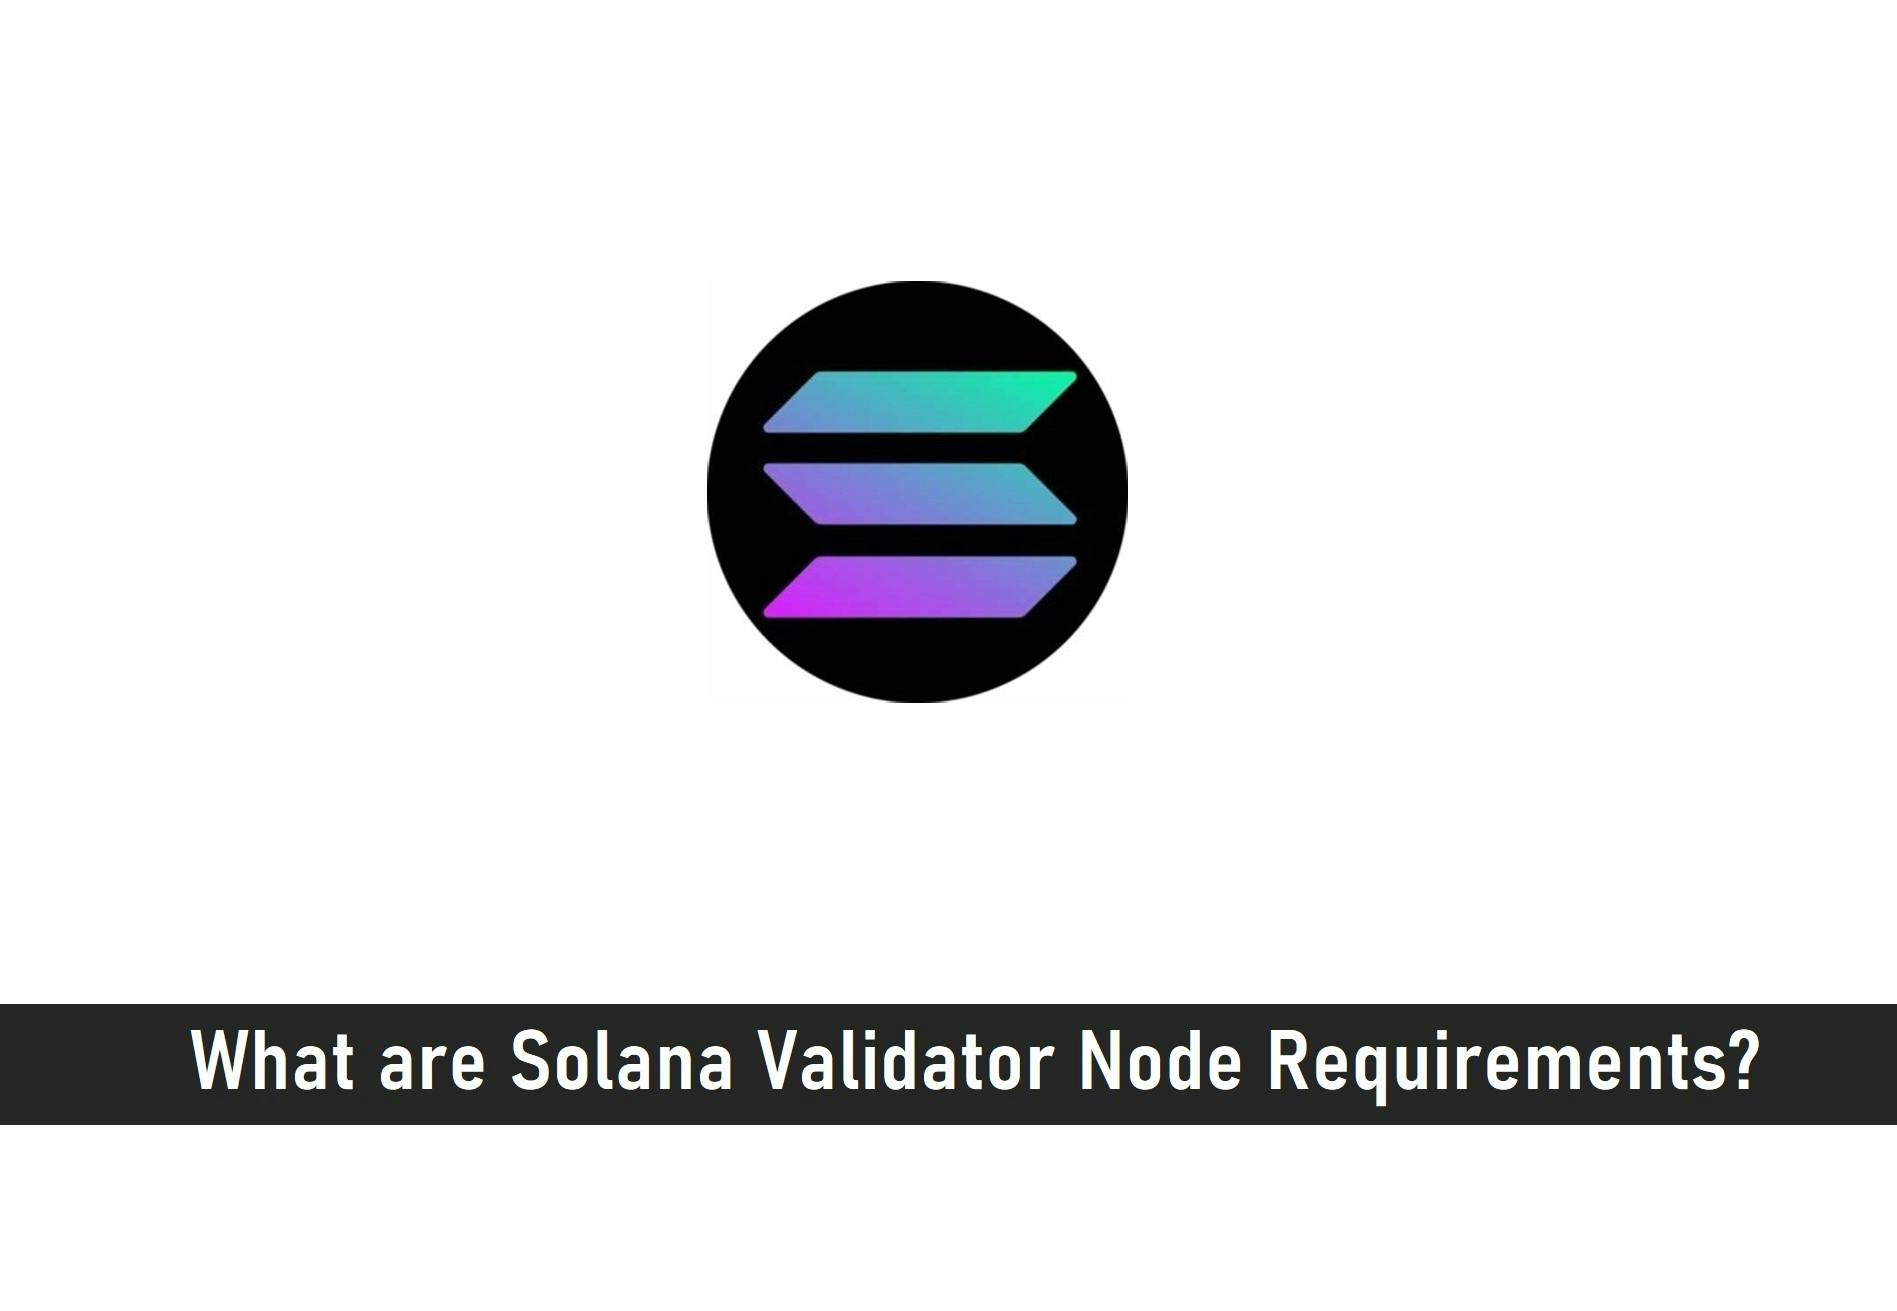 What are Solana Validator Node Requirements?